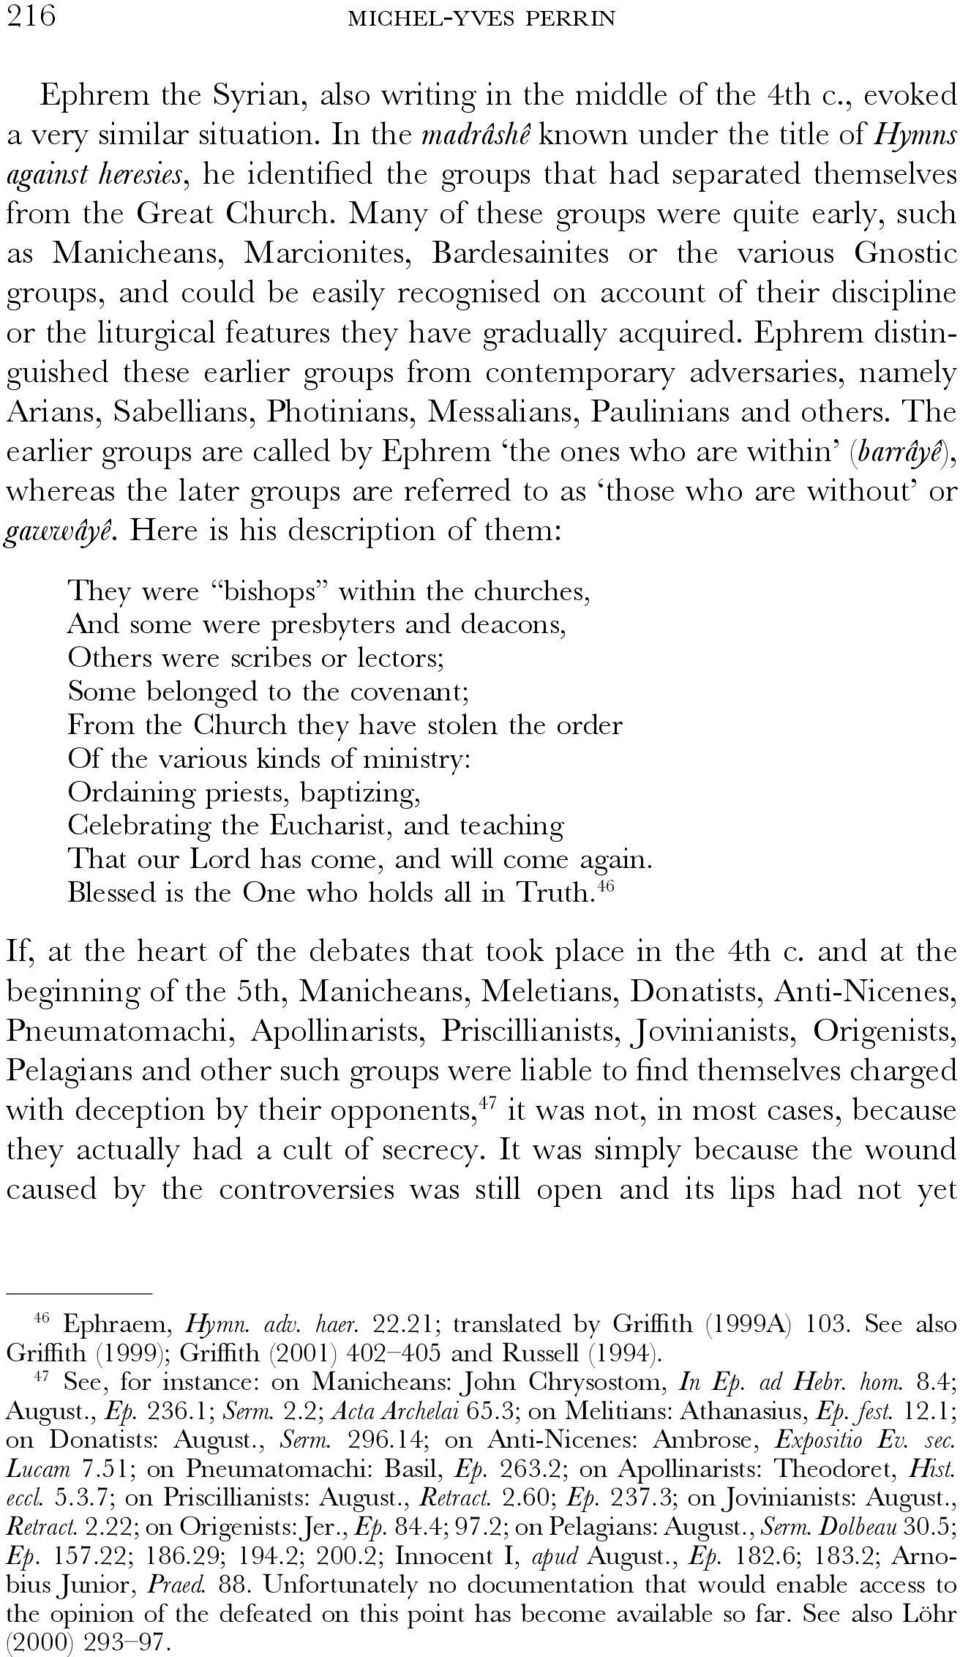 Many of these groups were quite early, such as Manicheans, Marcionites, Bardesainites or the various Gnostic groups, and could be easily recognised on account of their discipline or the liturgical